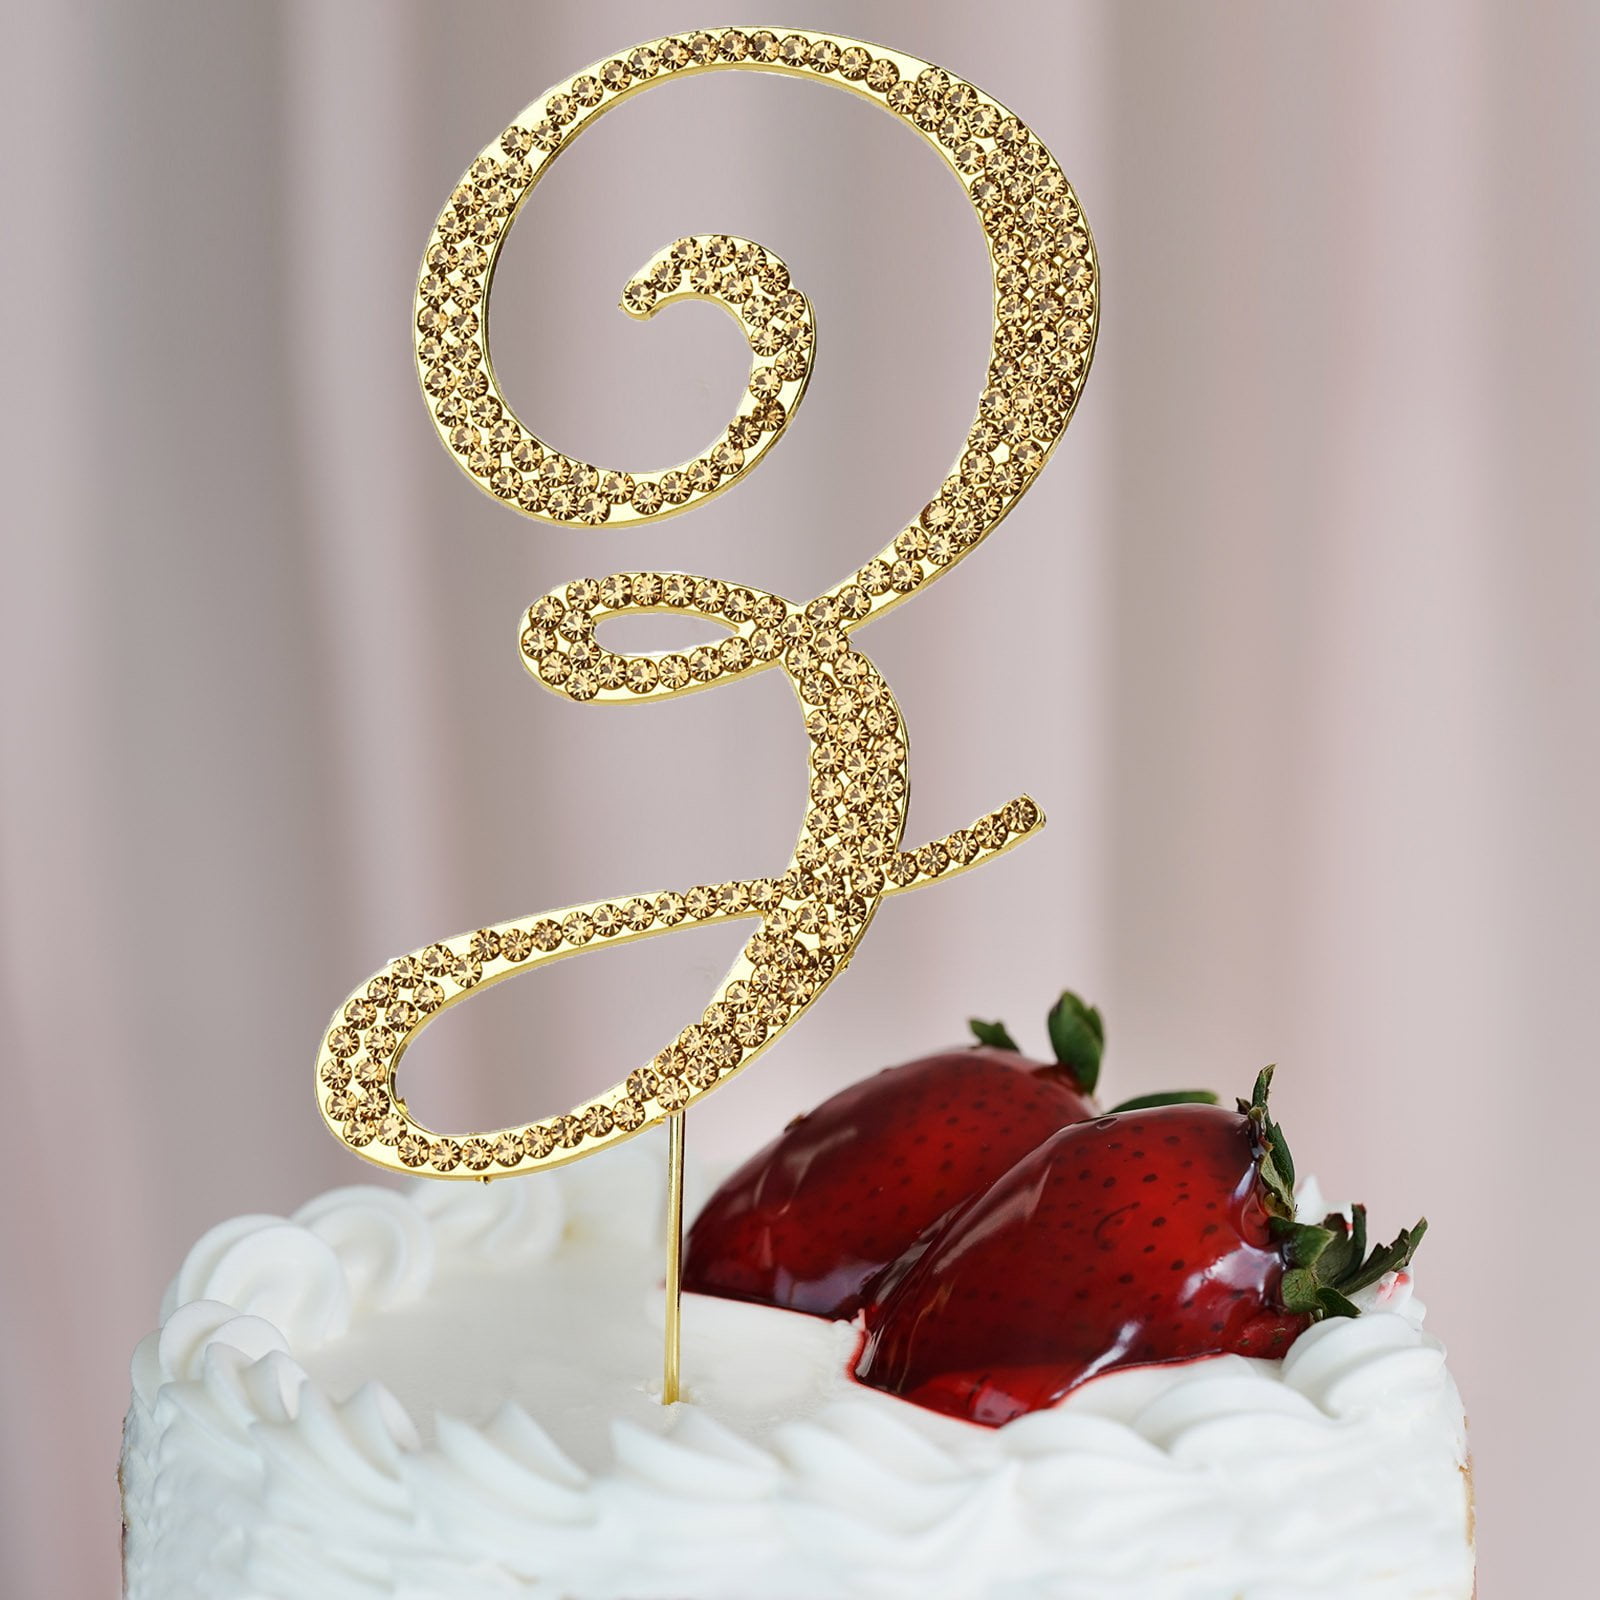 4.5" Tall Gold Shinny Rhinestone Letters Cake Toppers For Wedding Event Birthday 